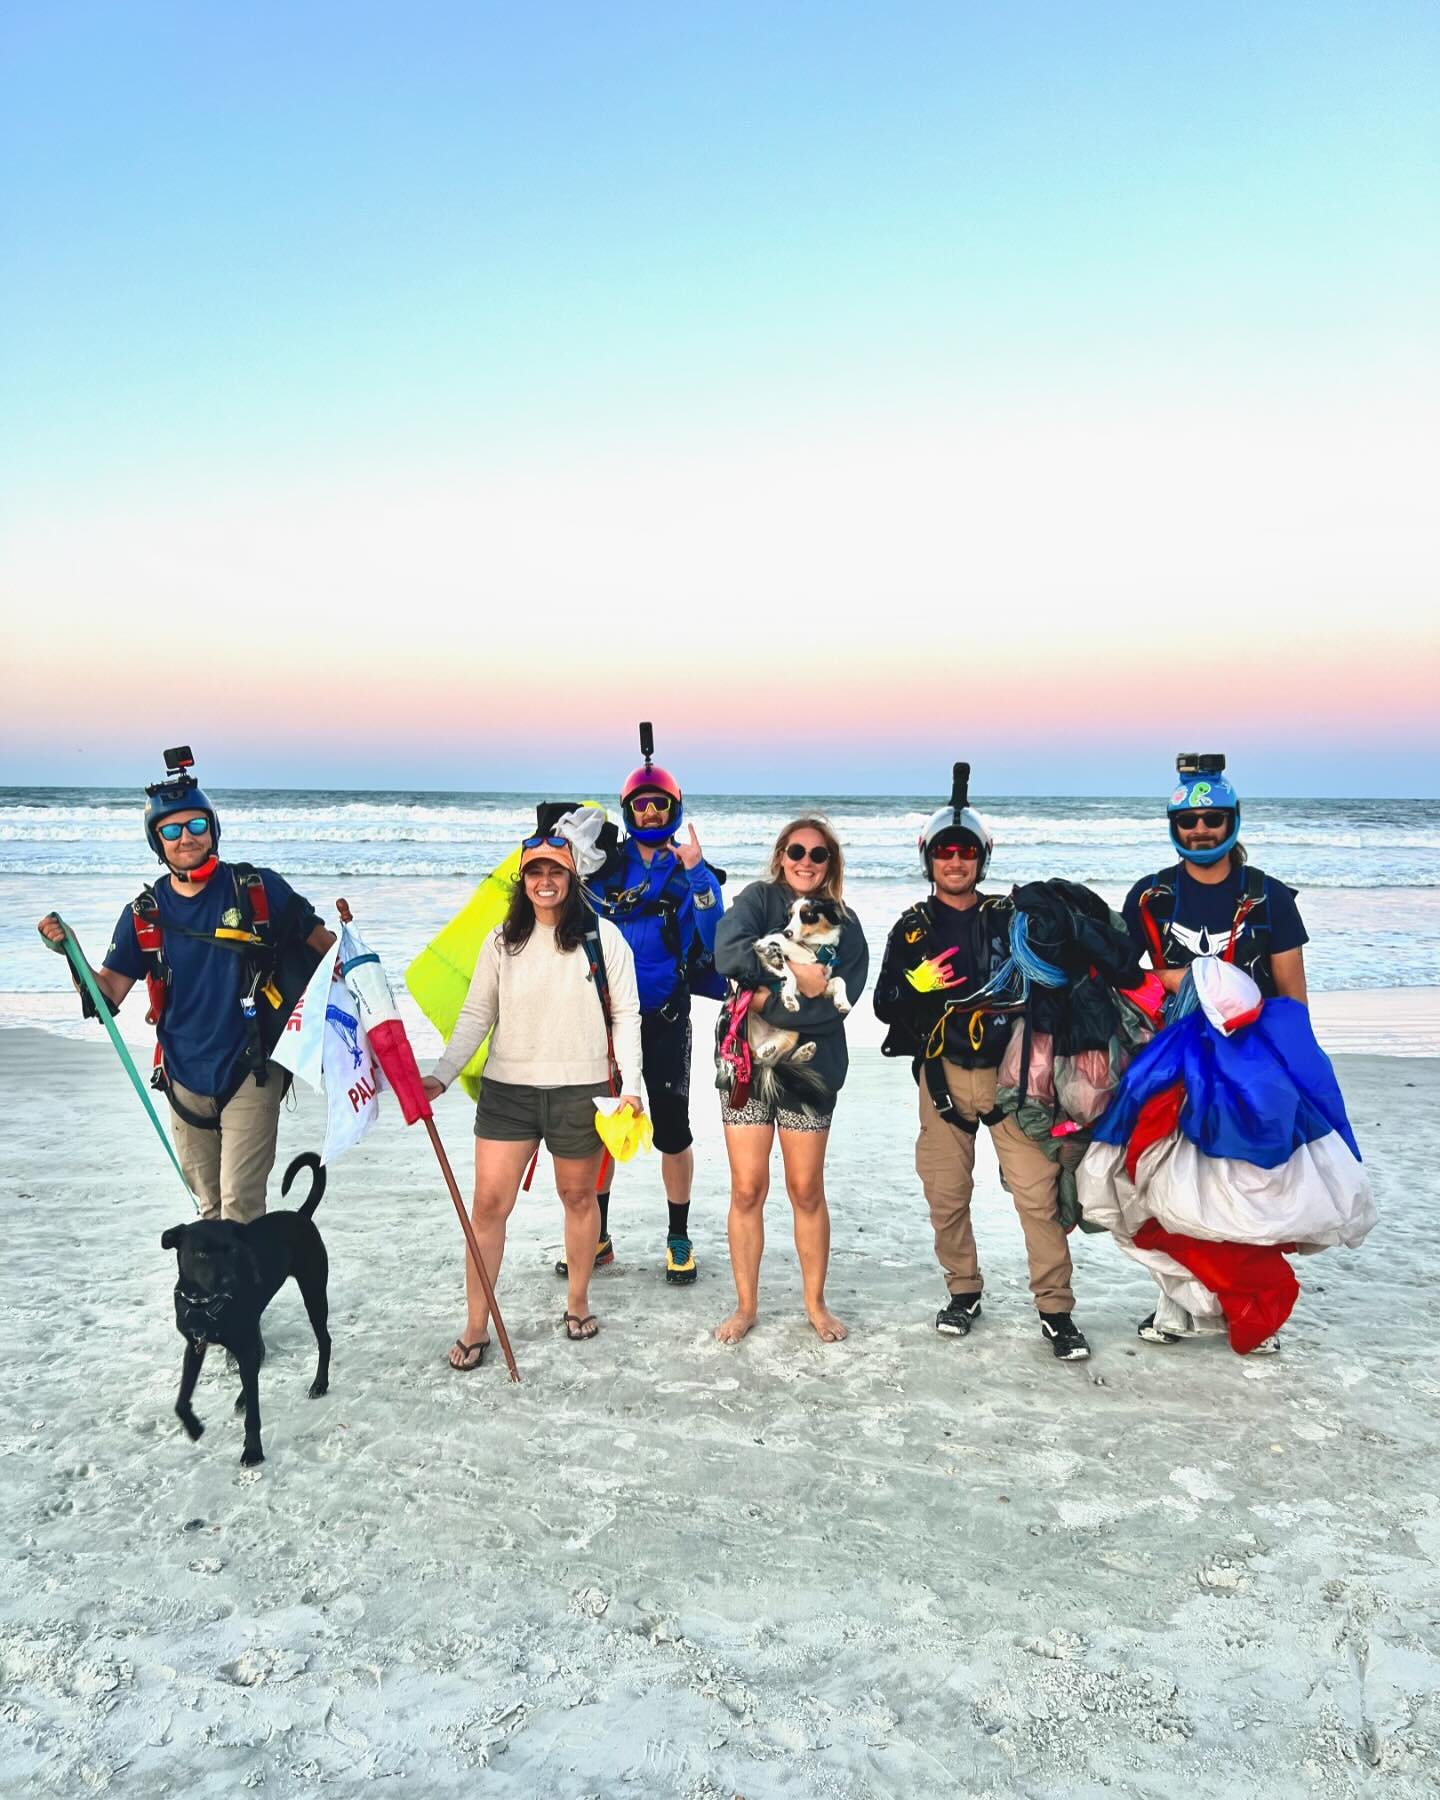 Sunset beach jump at Matanzas Beach was a hit! 🌅🪂 Spectators&rsquo; &lsquo;Ooohs&rsquo; and &lsquo;Ahhhs&rsquo; filled the air with excitement. Jumpers had a blast with stunning views. Thank you Heather for flying!  #SkydivePalatka #SunsetJump